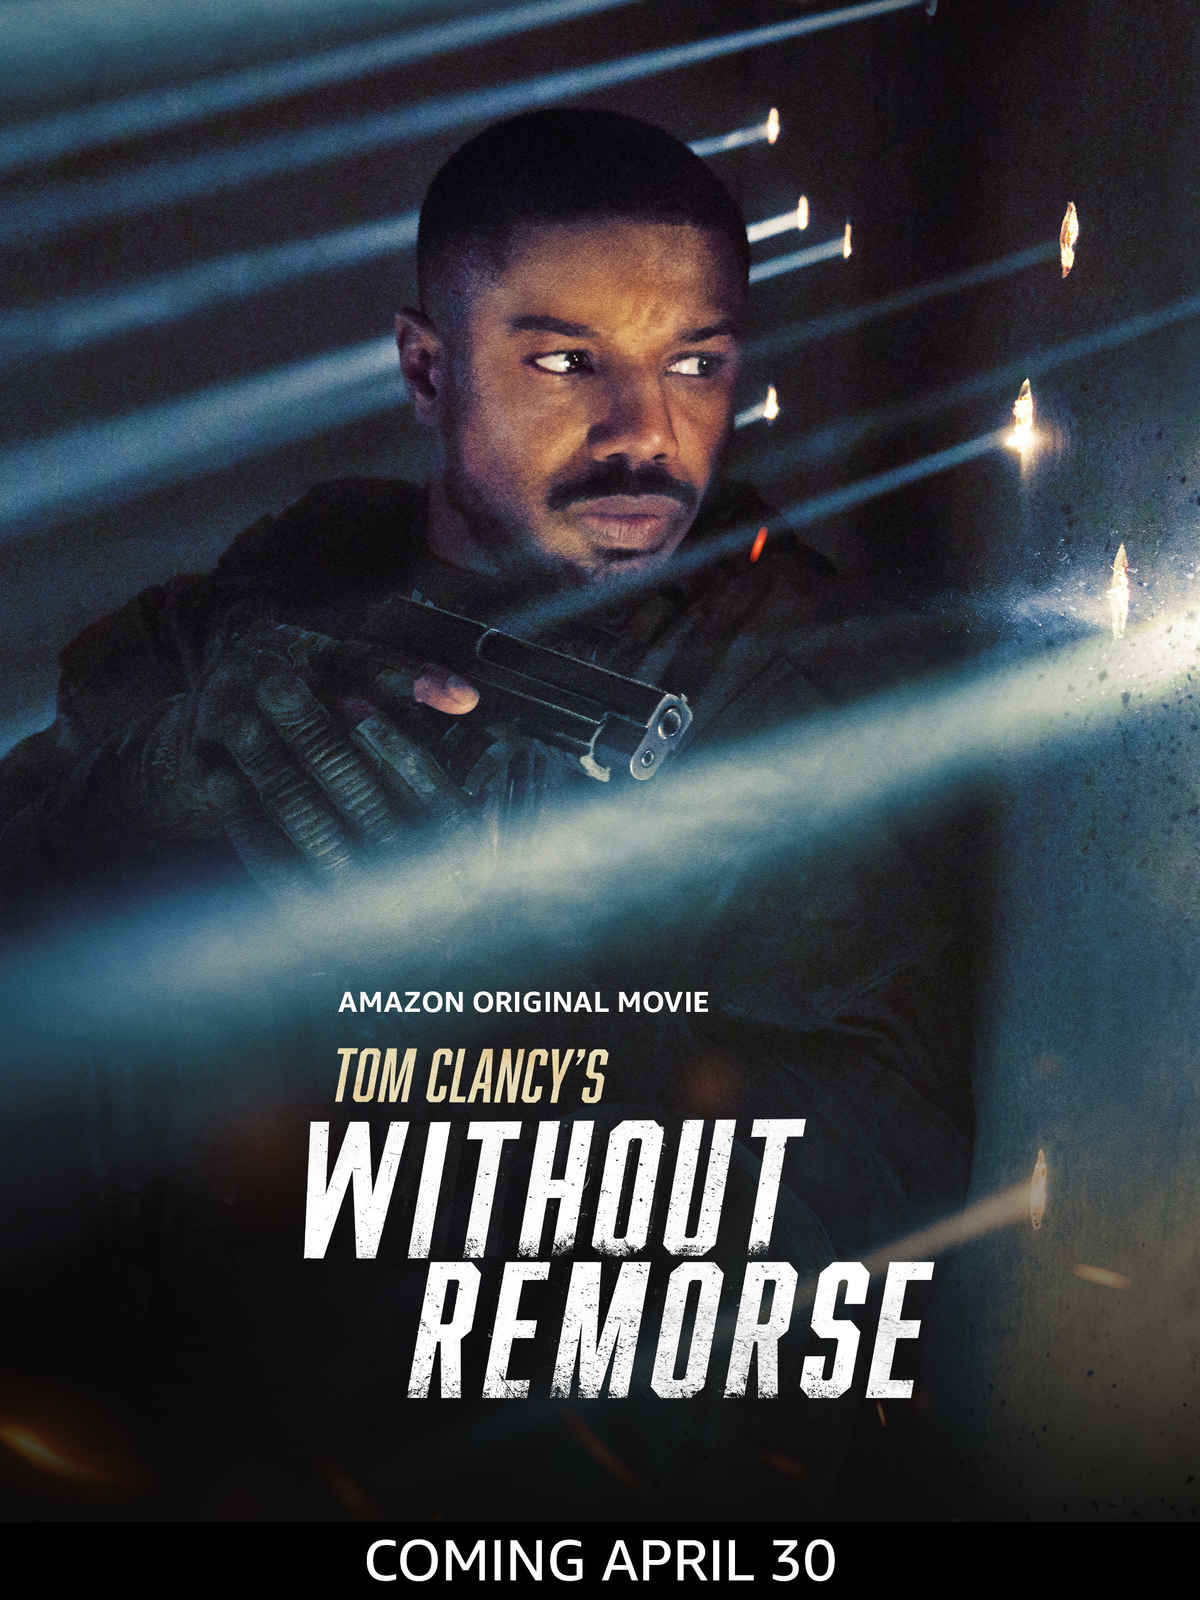 Tom Clancy's Without Remorse (Trailer)